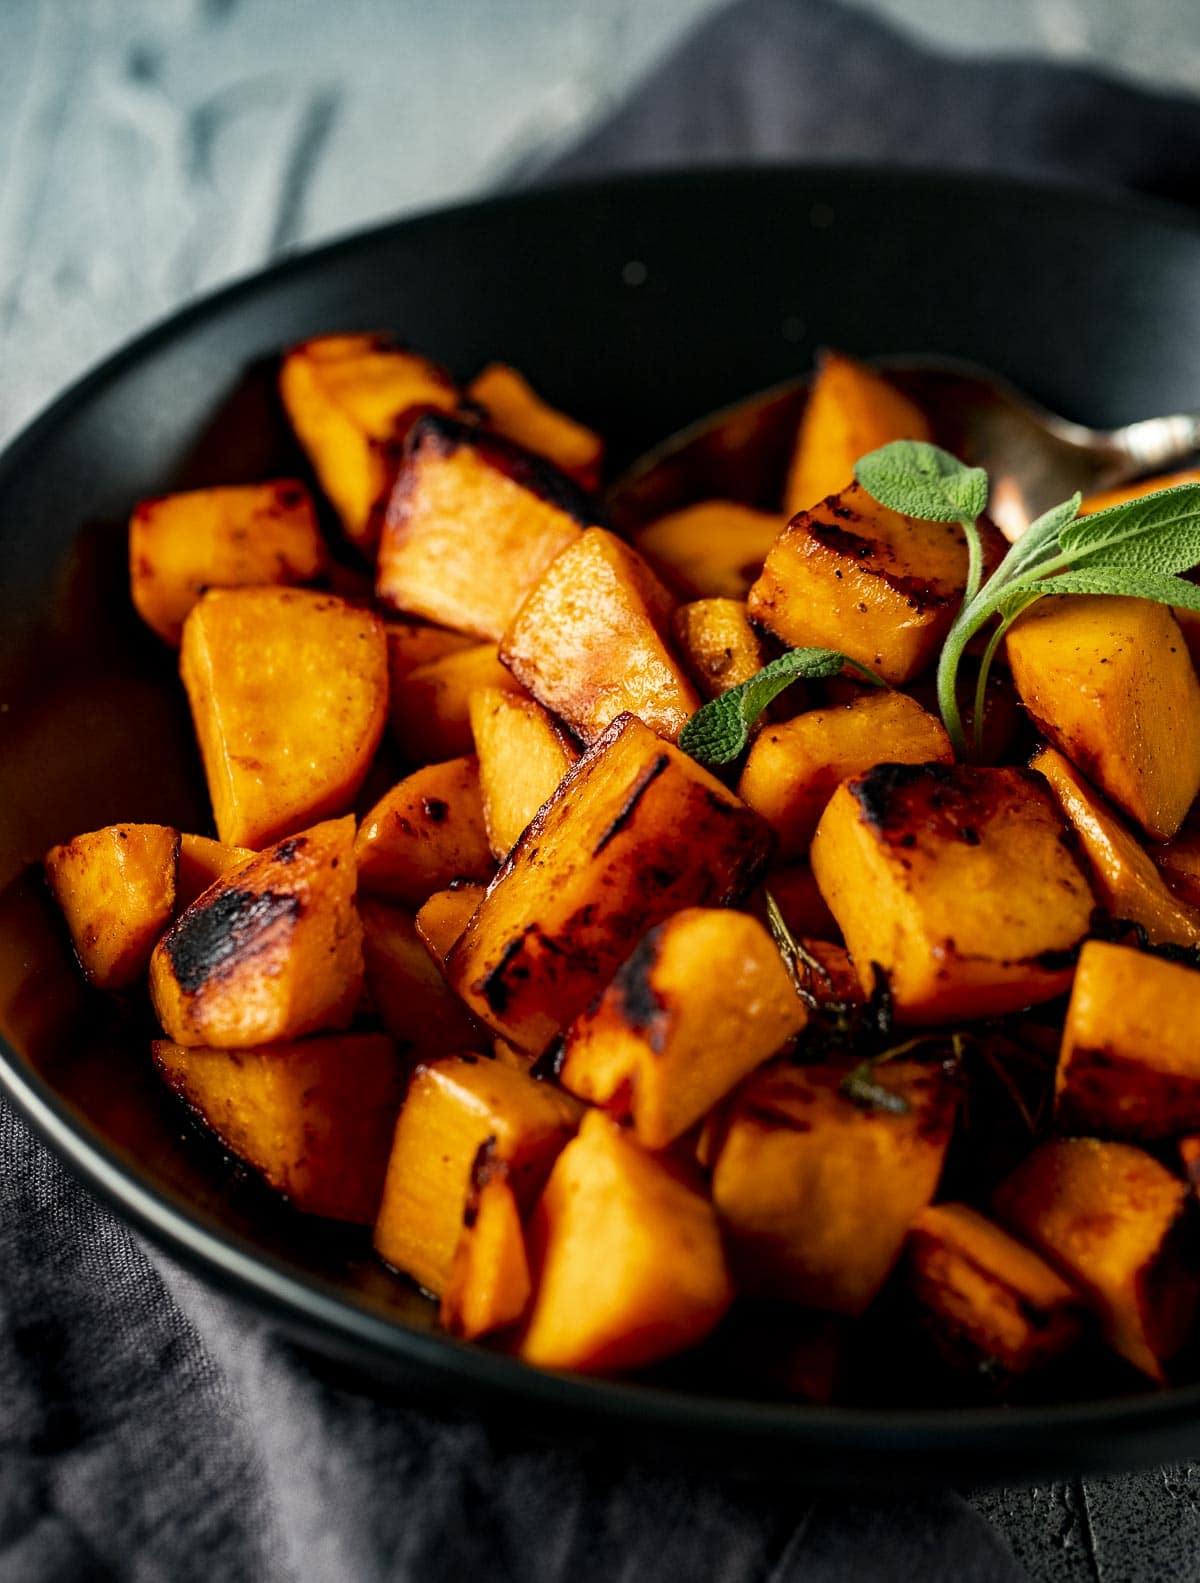 Side view of cooked sweet potatoes served in a black bowl.